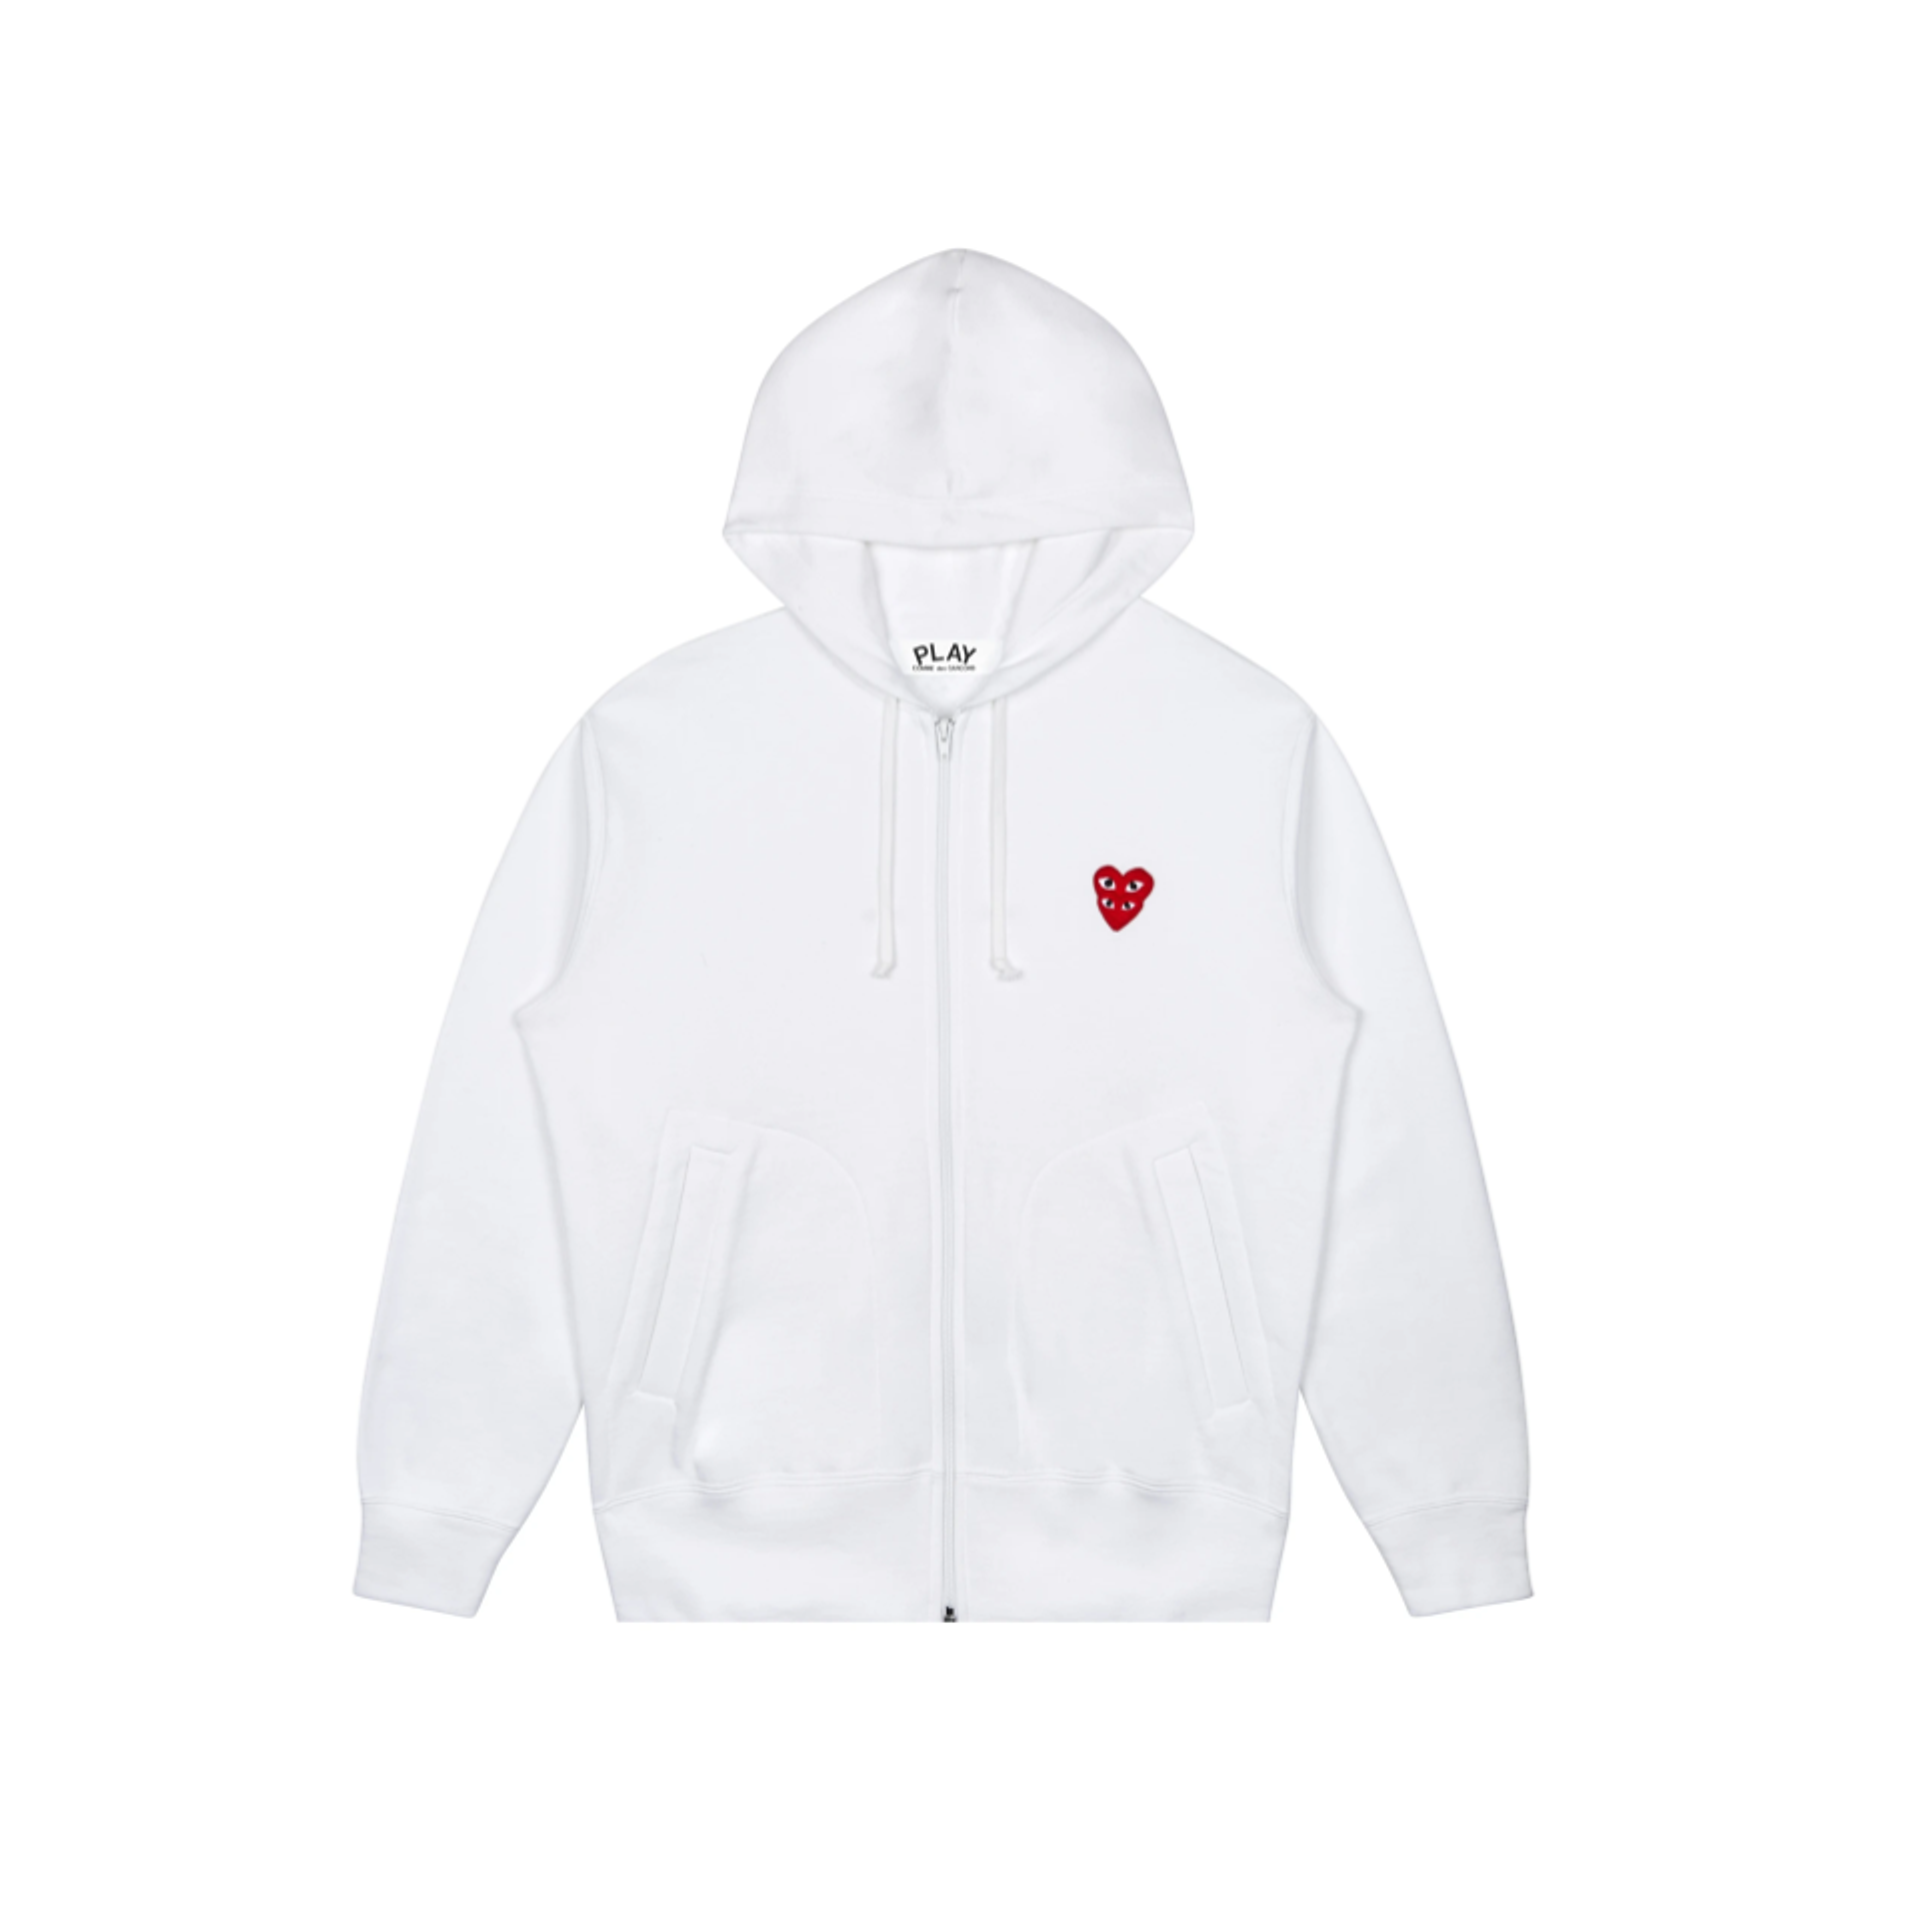 PLAY Comme Des Garcons Double Red Emblem Hoodie Men's (White)